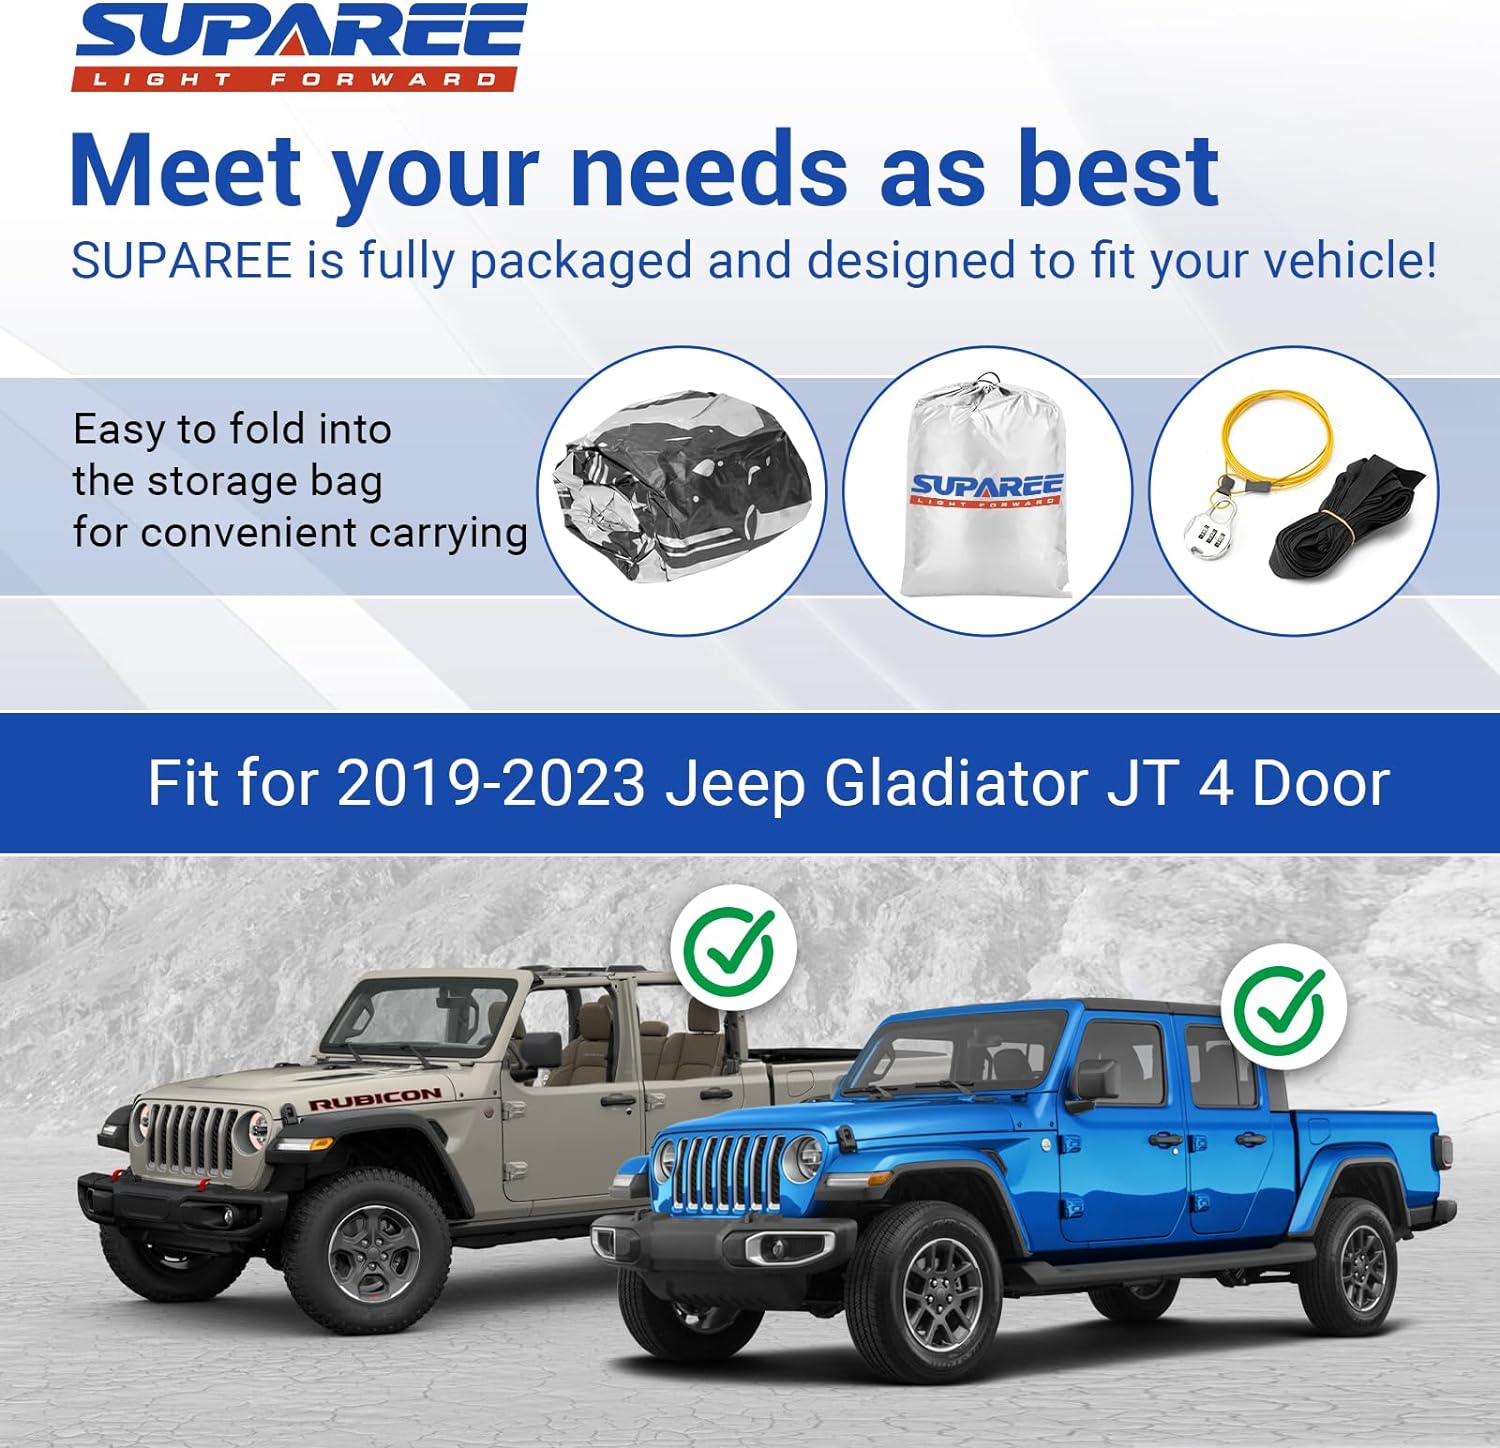 SUPAREE Jeep Cover Suparee Jeep Gladiator Full Cover Waterproof for 2020-Later JT 4 Door Product description